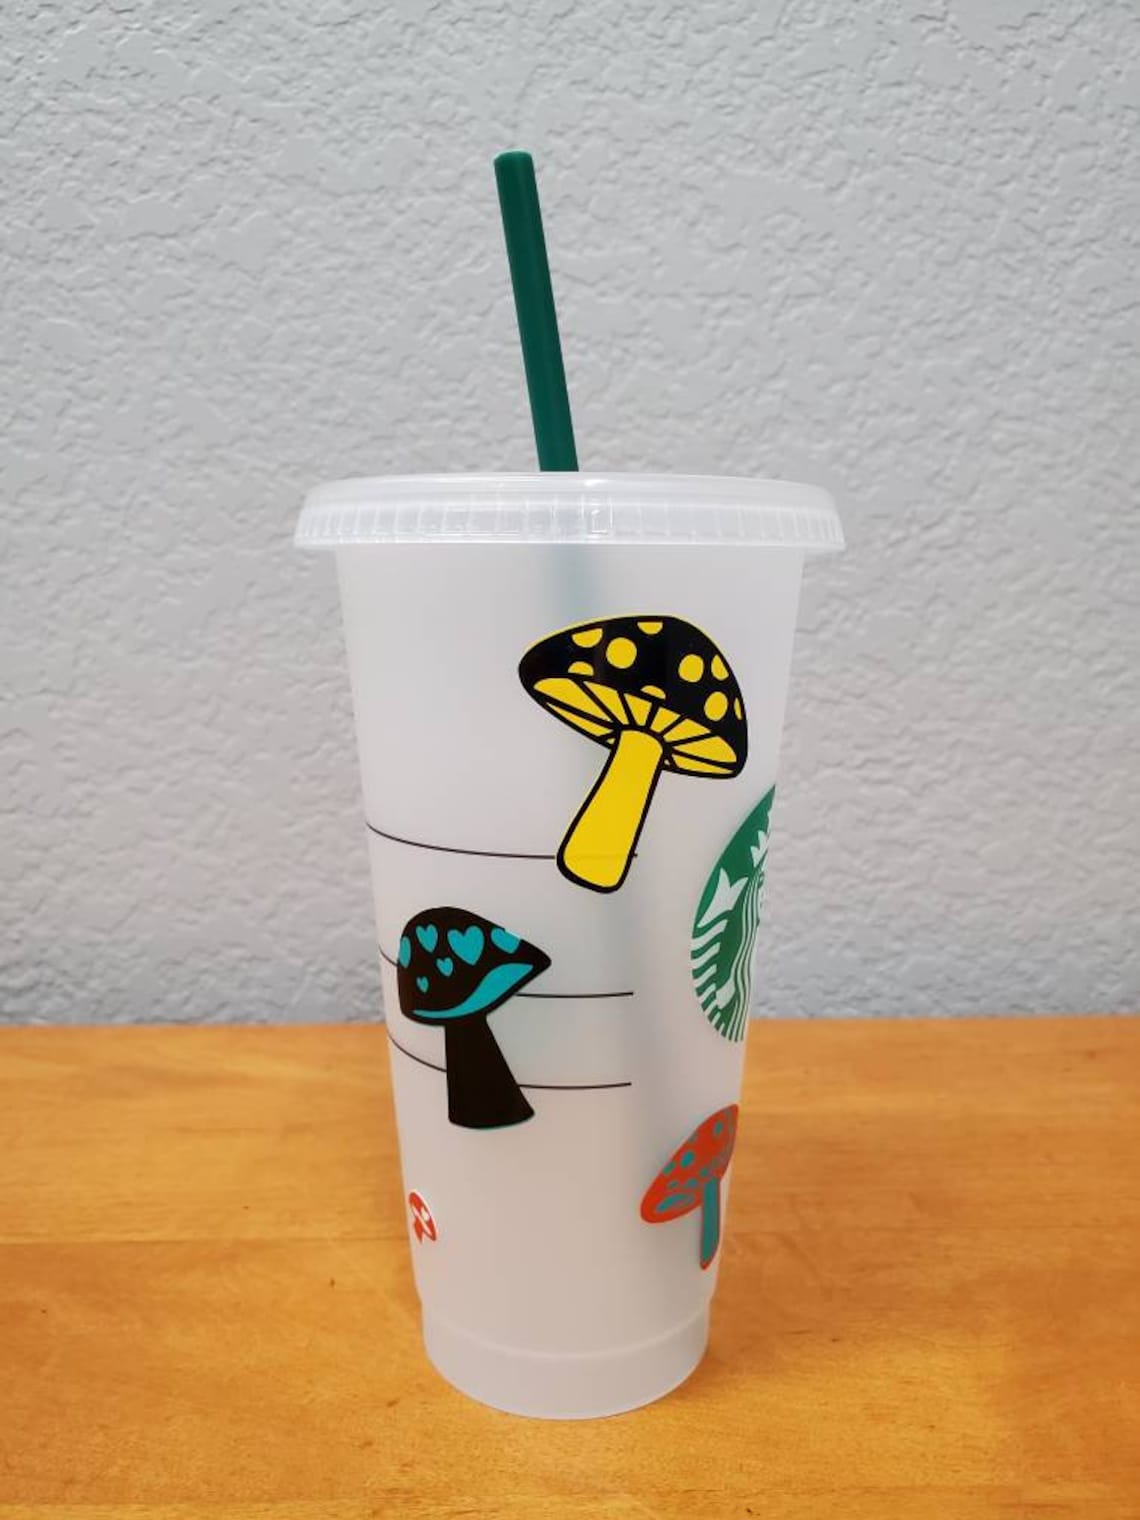 Personalized Psychedelic Mushroom Starbucks Cup / Shroom Cup Etsy